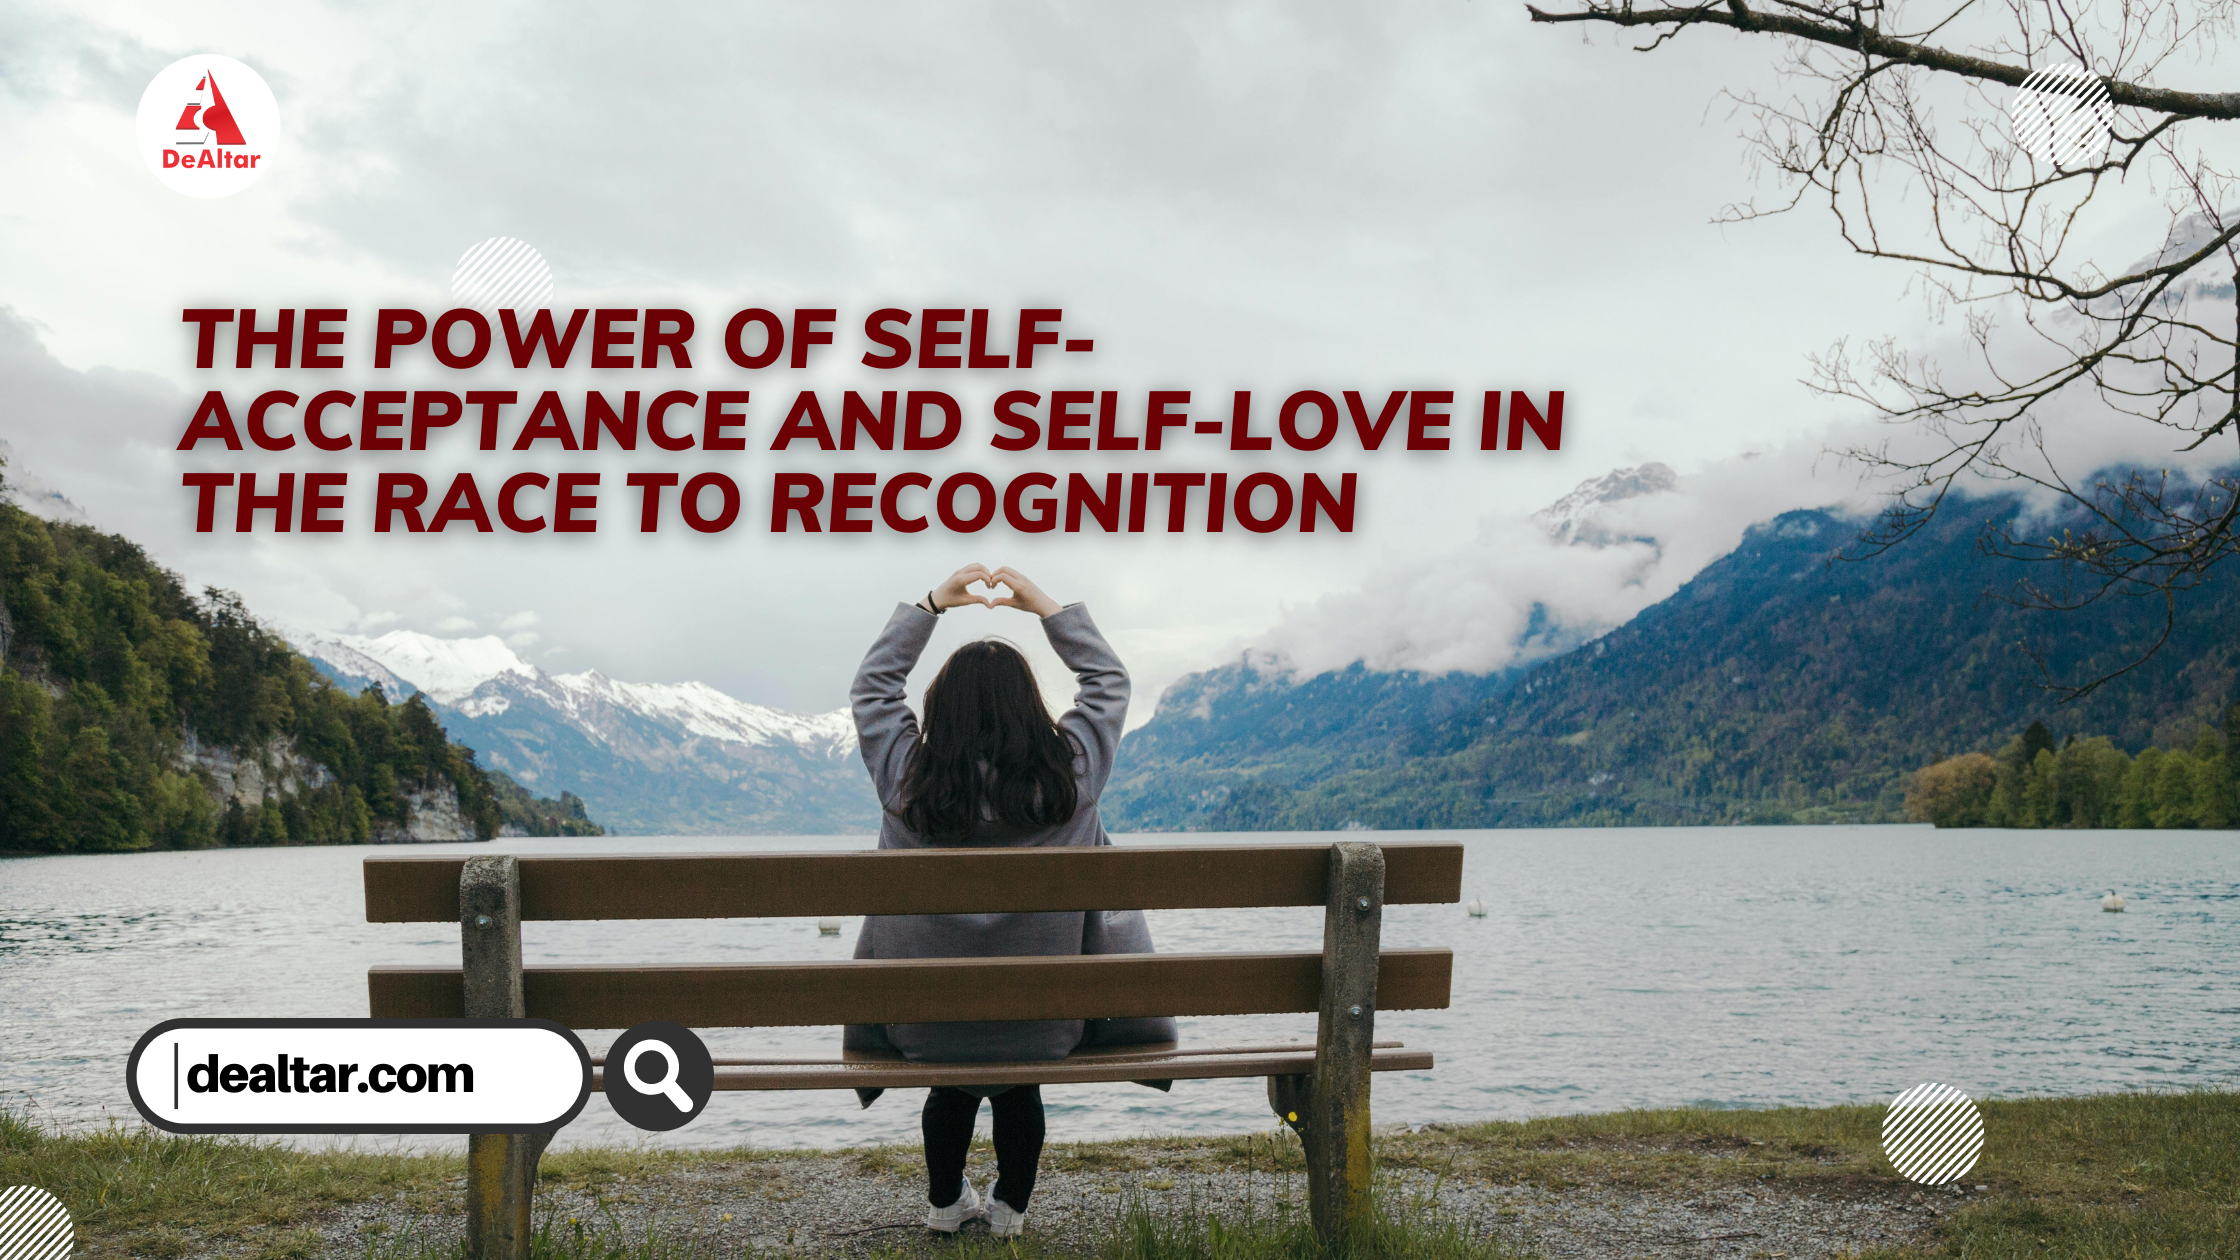 The Power of Self-Acceptance and Self-Love in the Race to Recognition